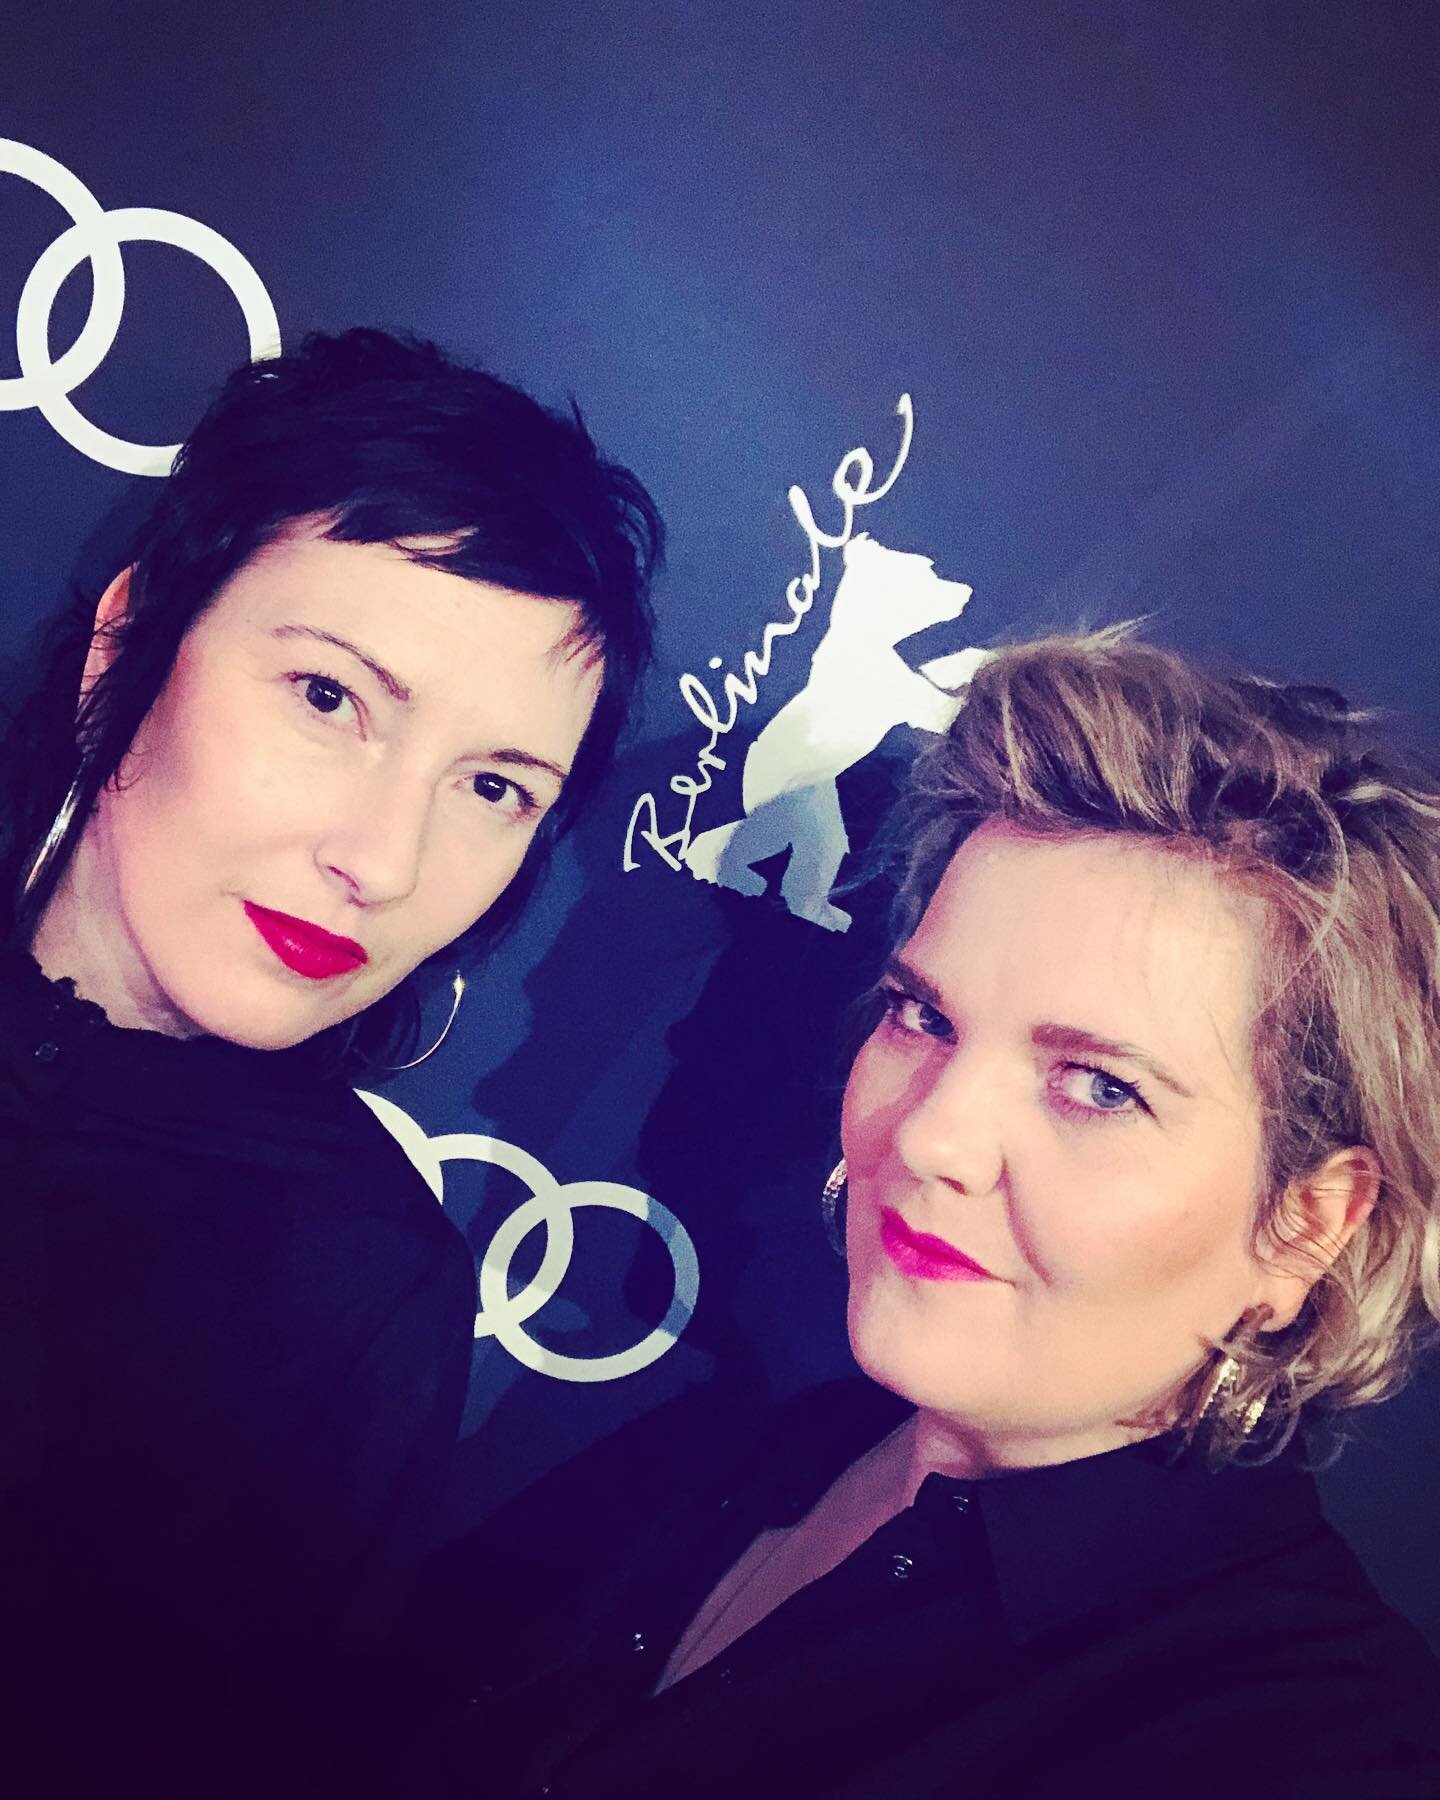 Berlinale Lounge 2020
YAY! an eventful week is done ... a wonderful SUNDAY💫 for everyone❣️ cheers 🅱️&amp;🅱️ .
.
.
#berlinale #audi #djlove #dreamteam#berlinale2020